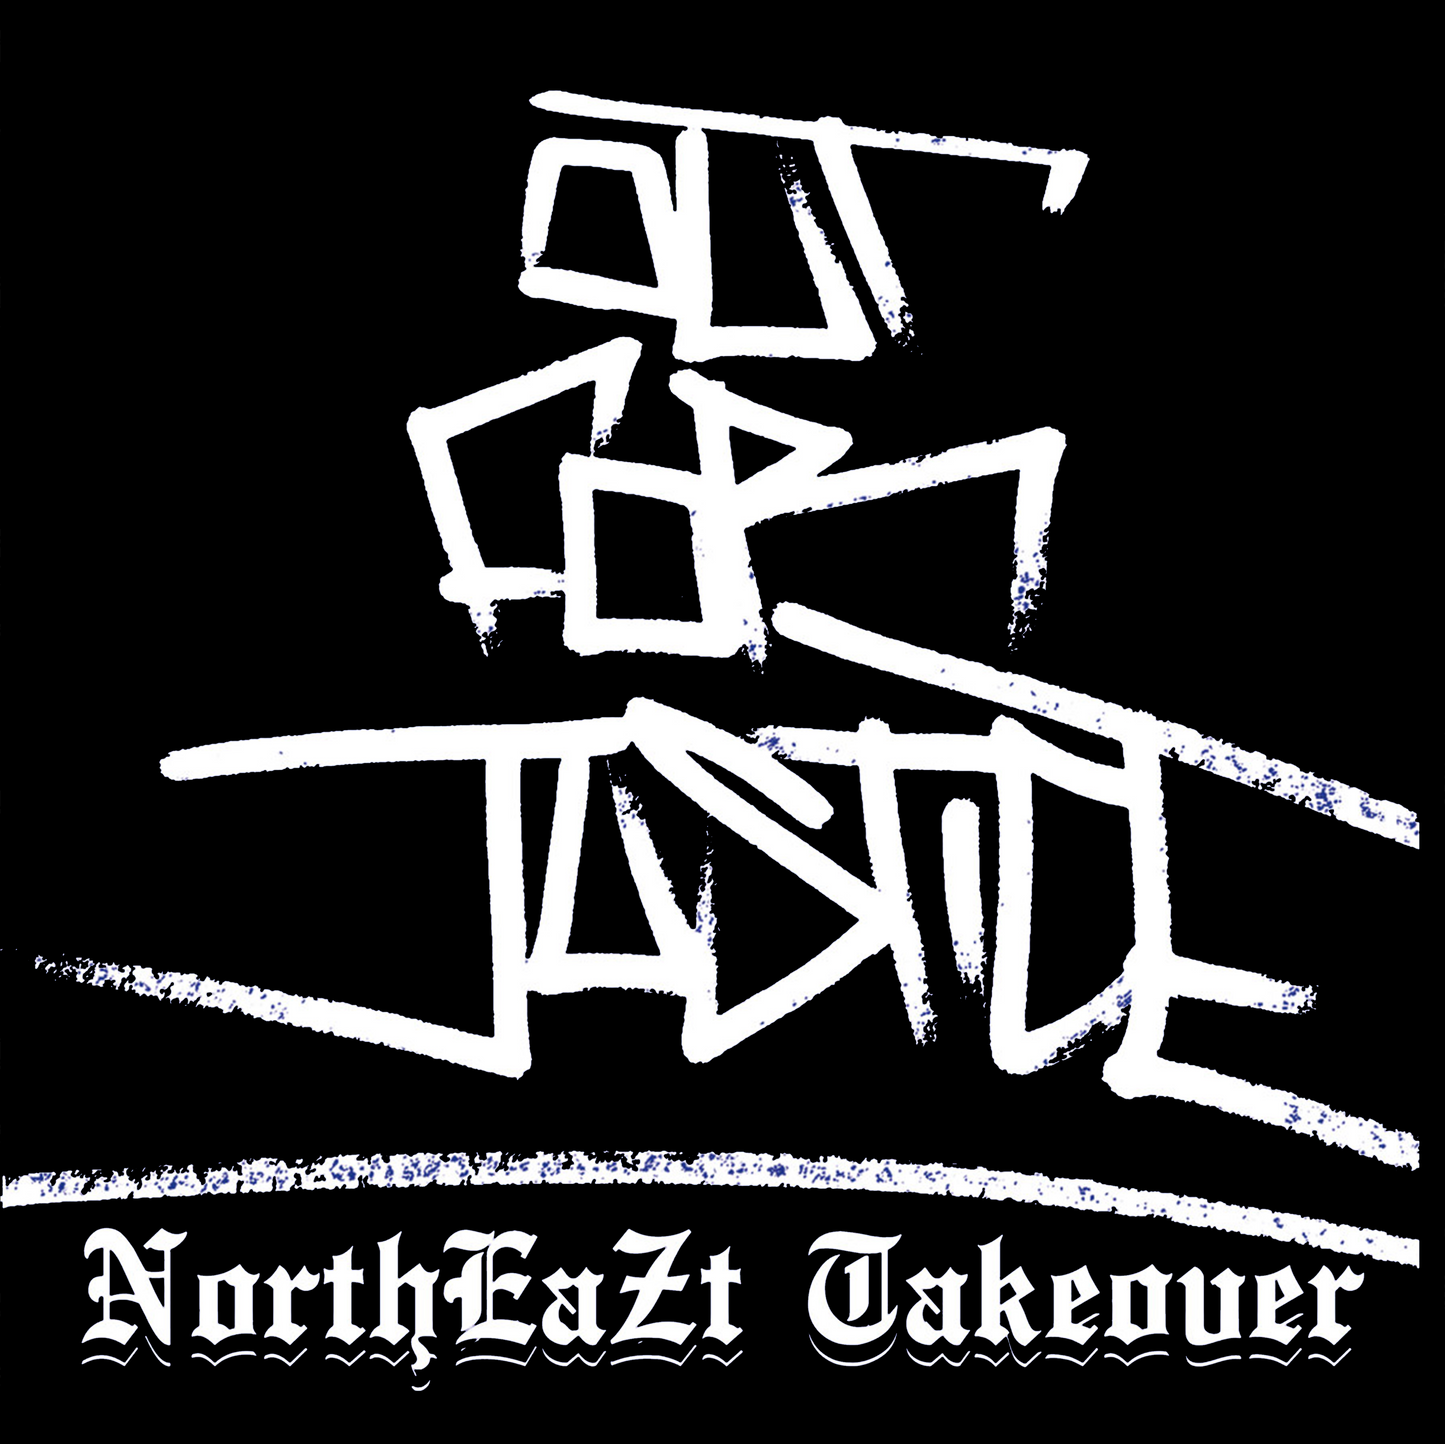 Out For Justice  "Northeazt Takeover" LP